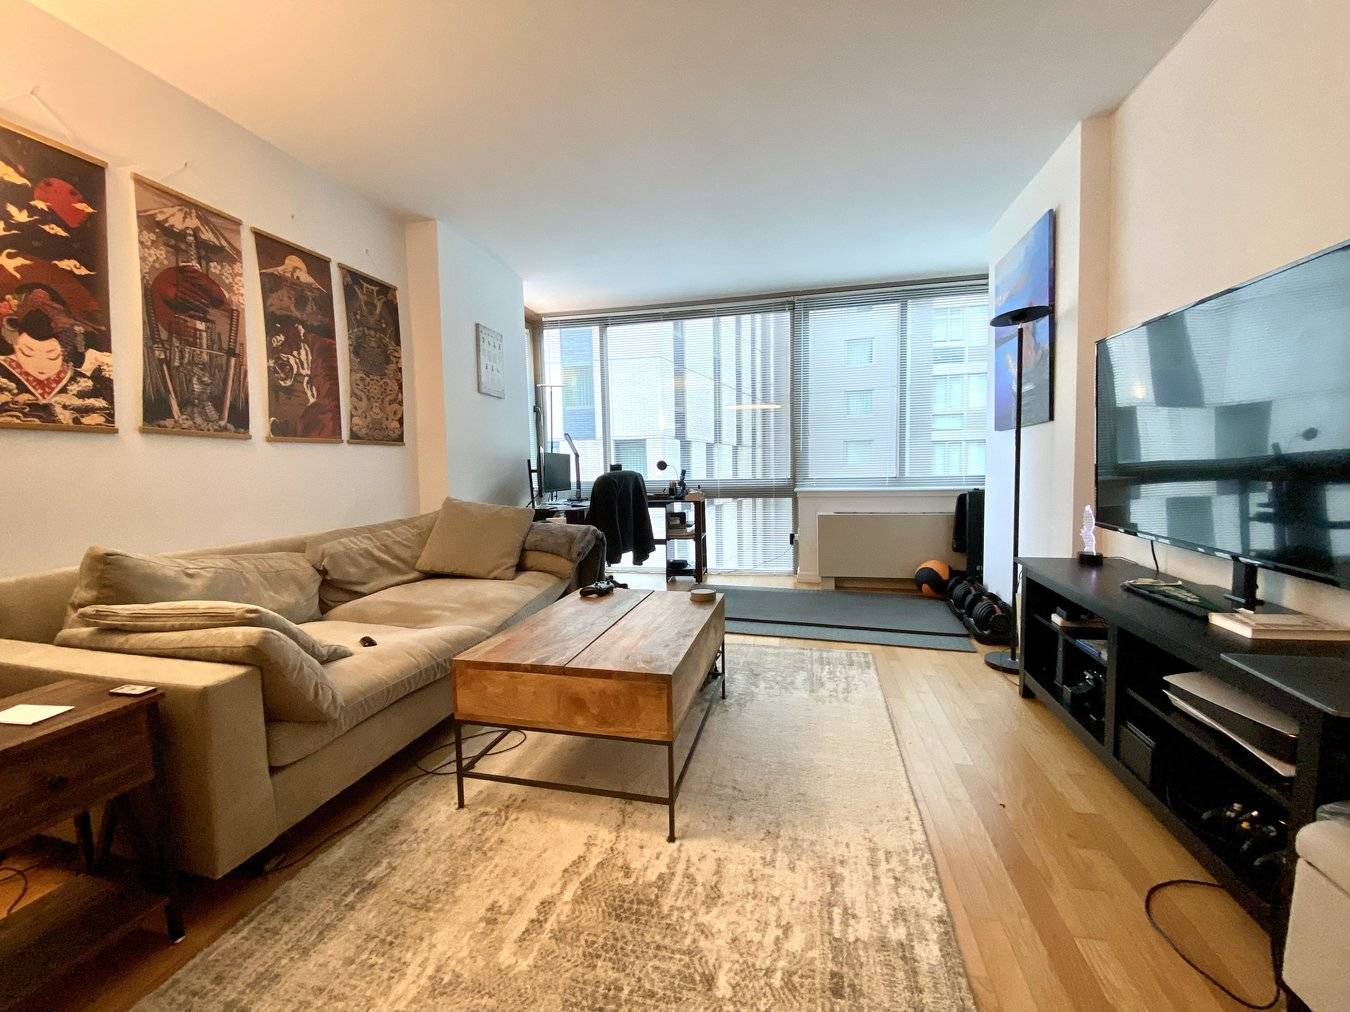 Come see this Lowest priced true one bedroom apartment in the financial district.